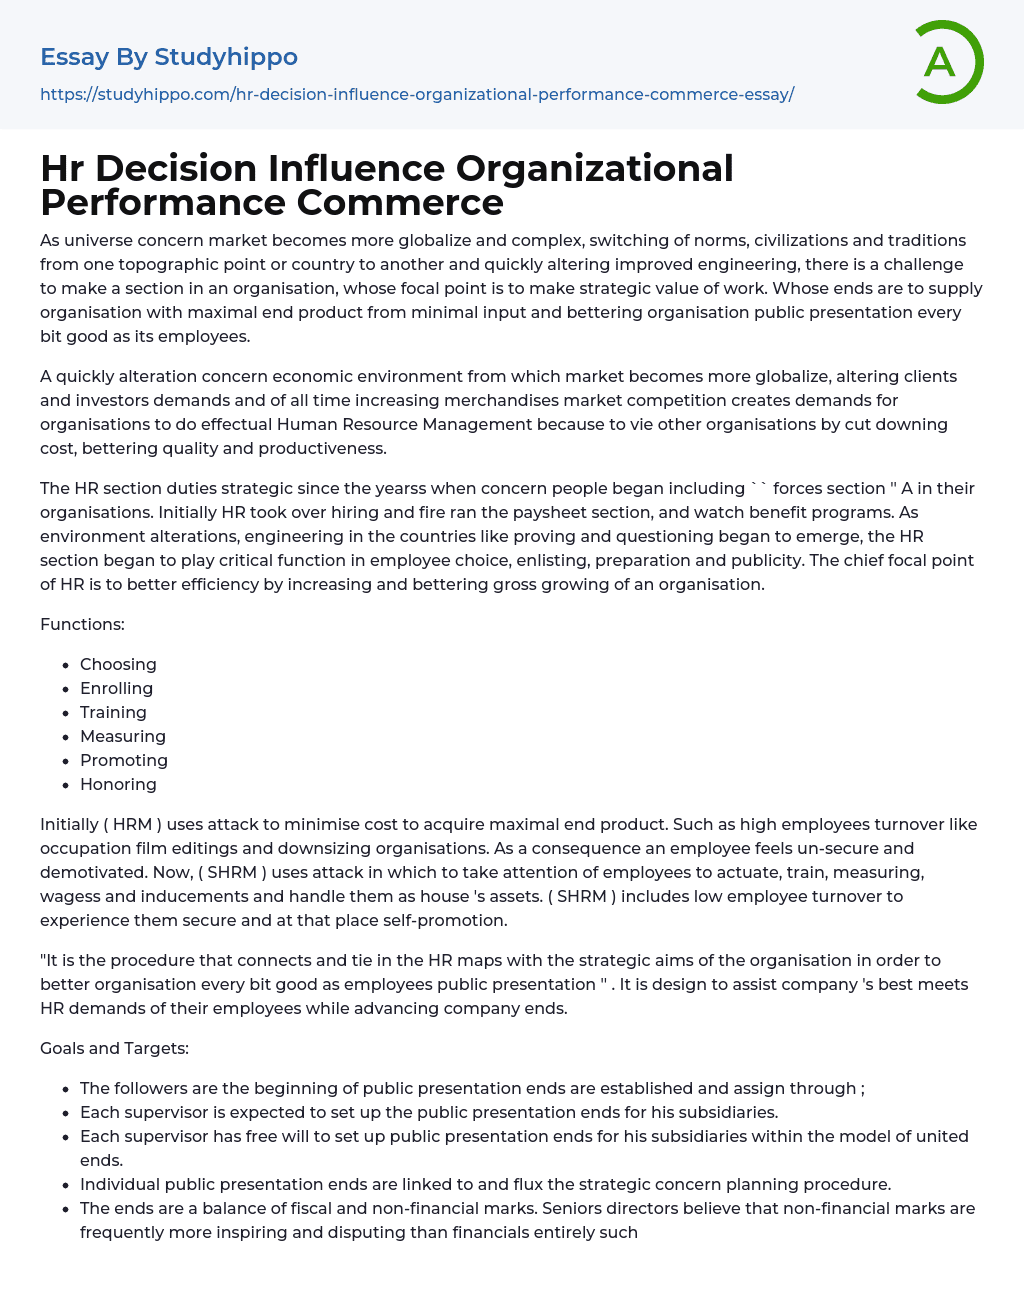 Hr Decision Influence Organizational Performance Commerce Essay Example